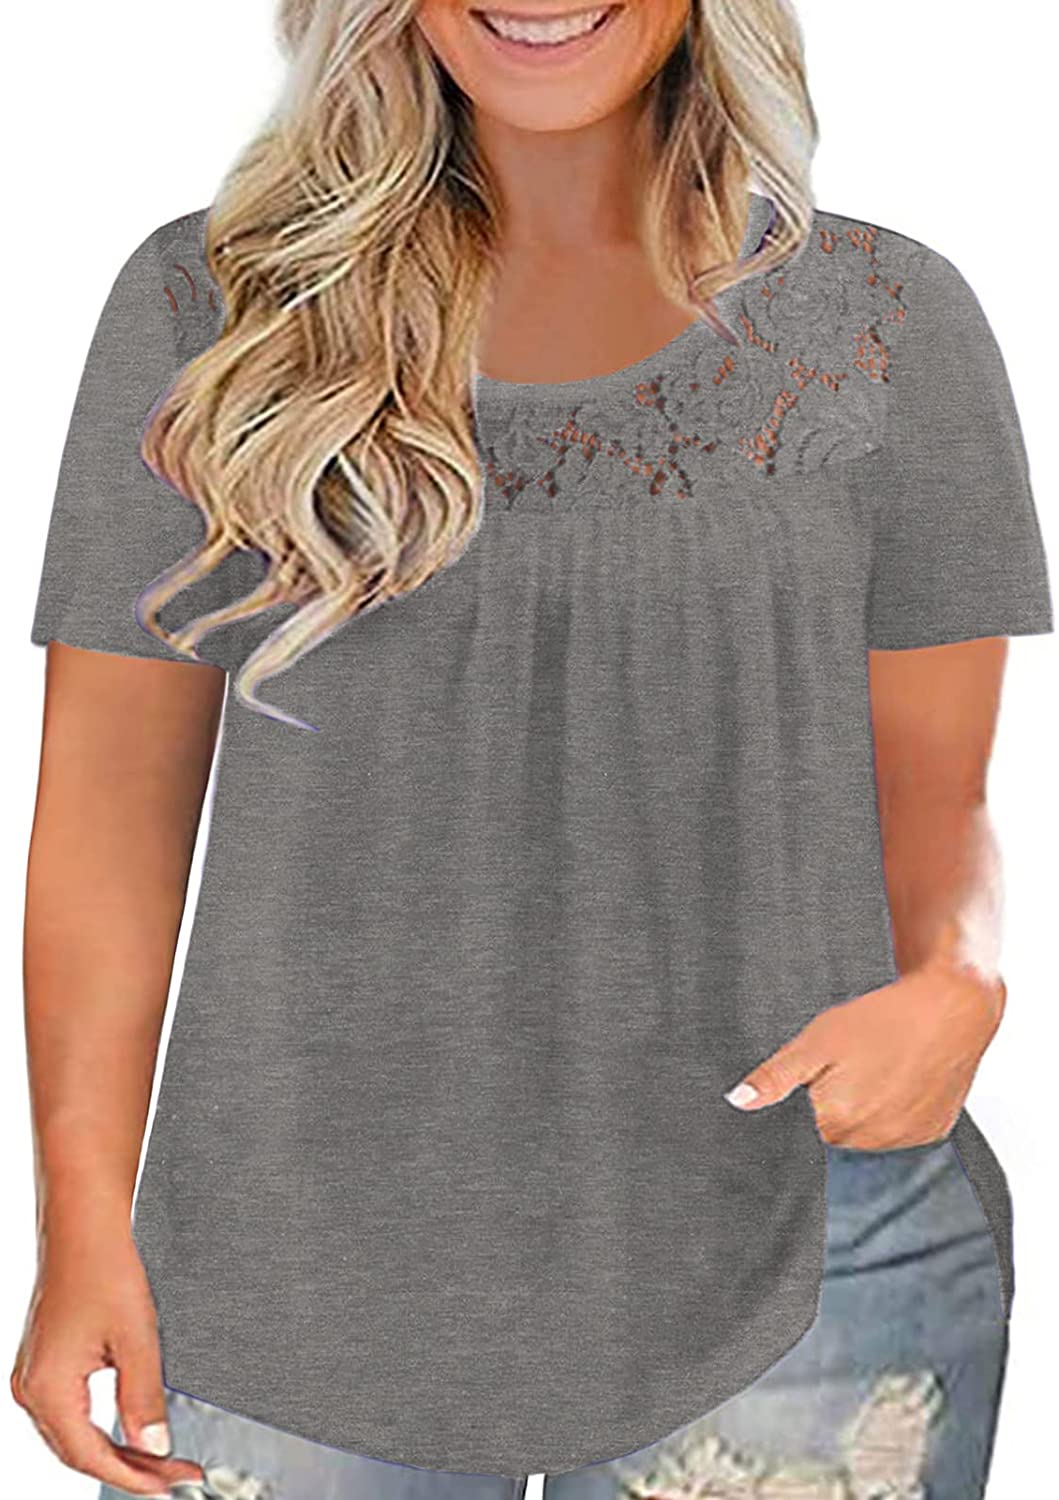 ROSRISS Plus-Size Tops for Women Summer Casual Short Sleeve T Shirts Loose Tunics